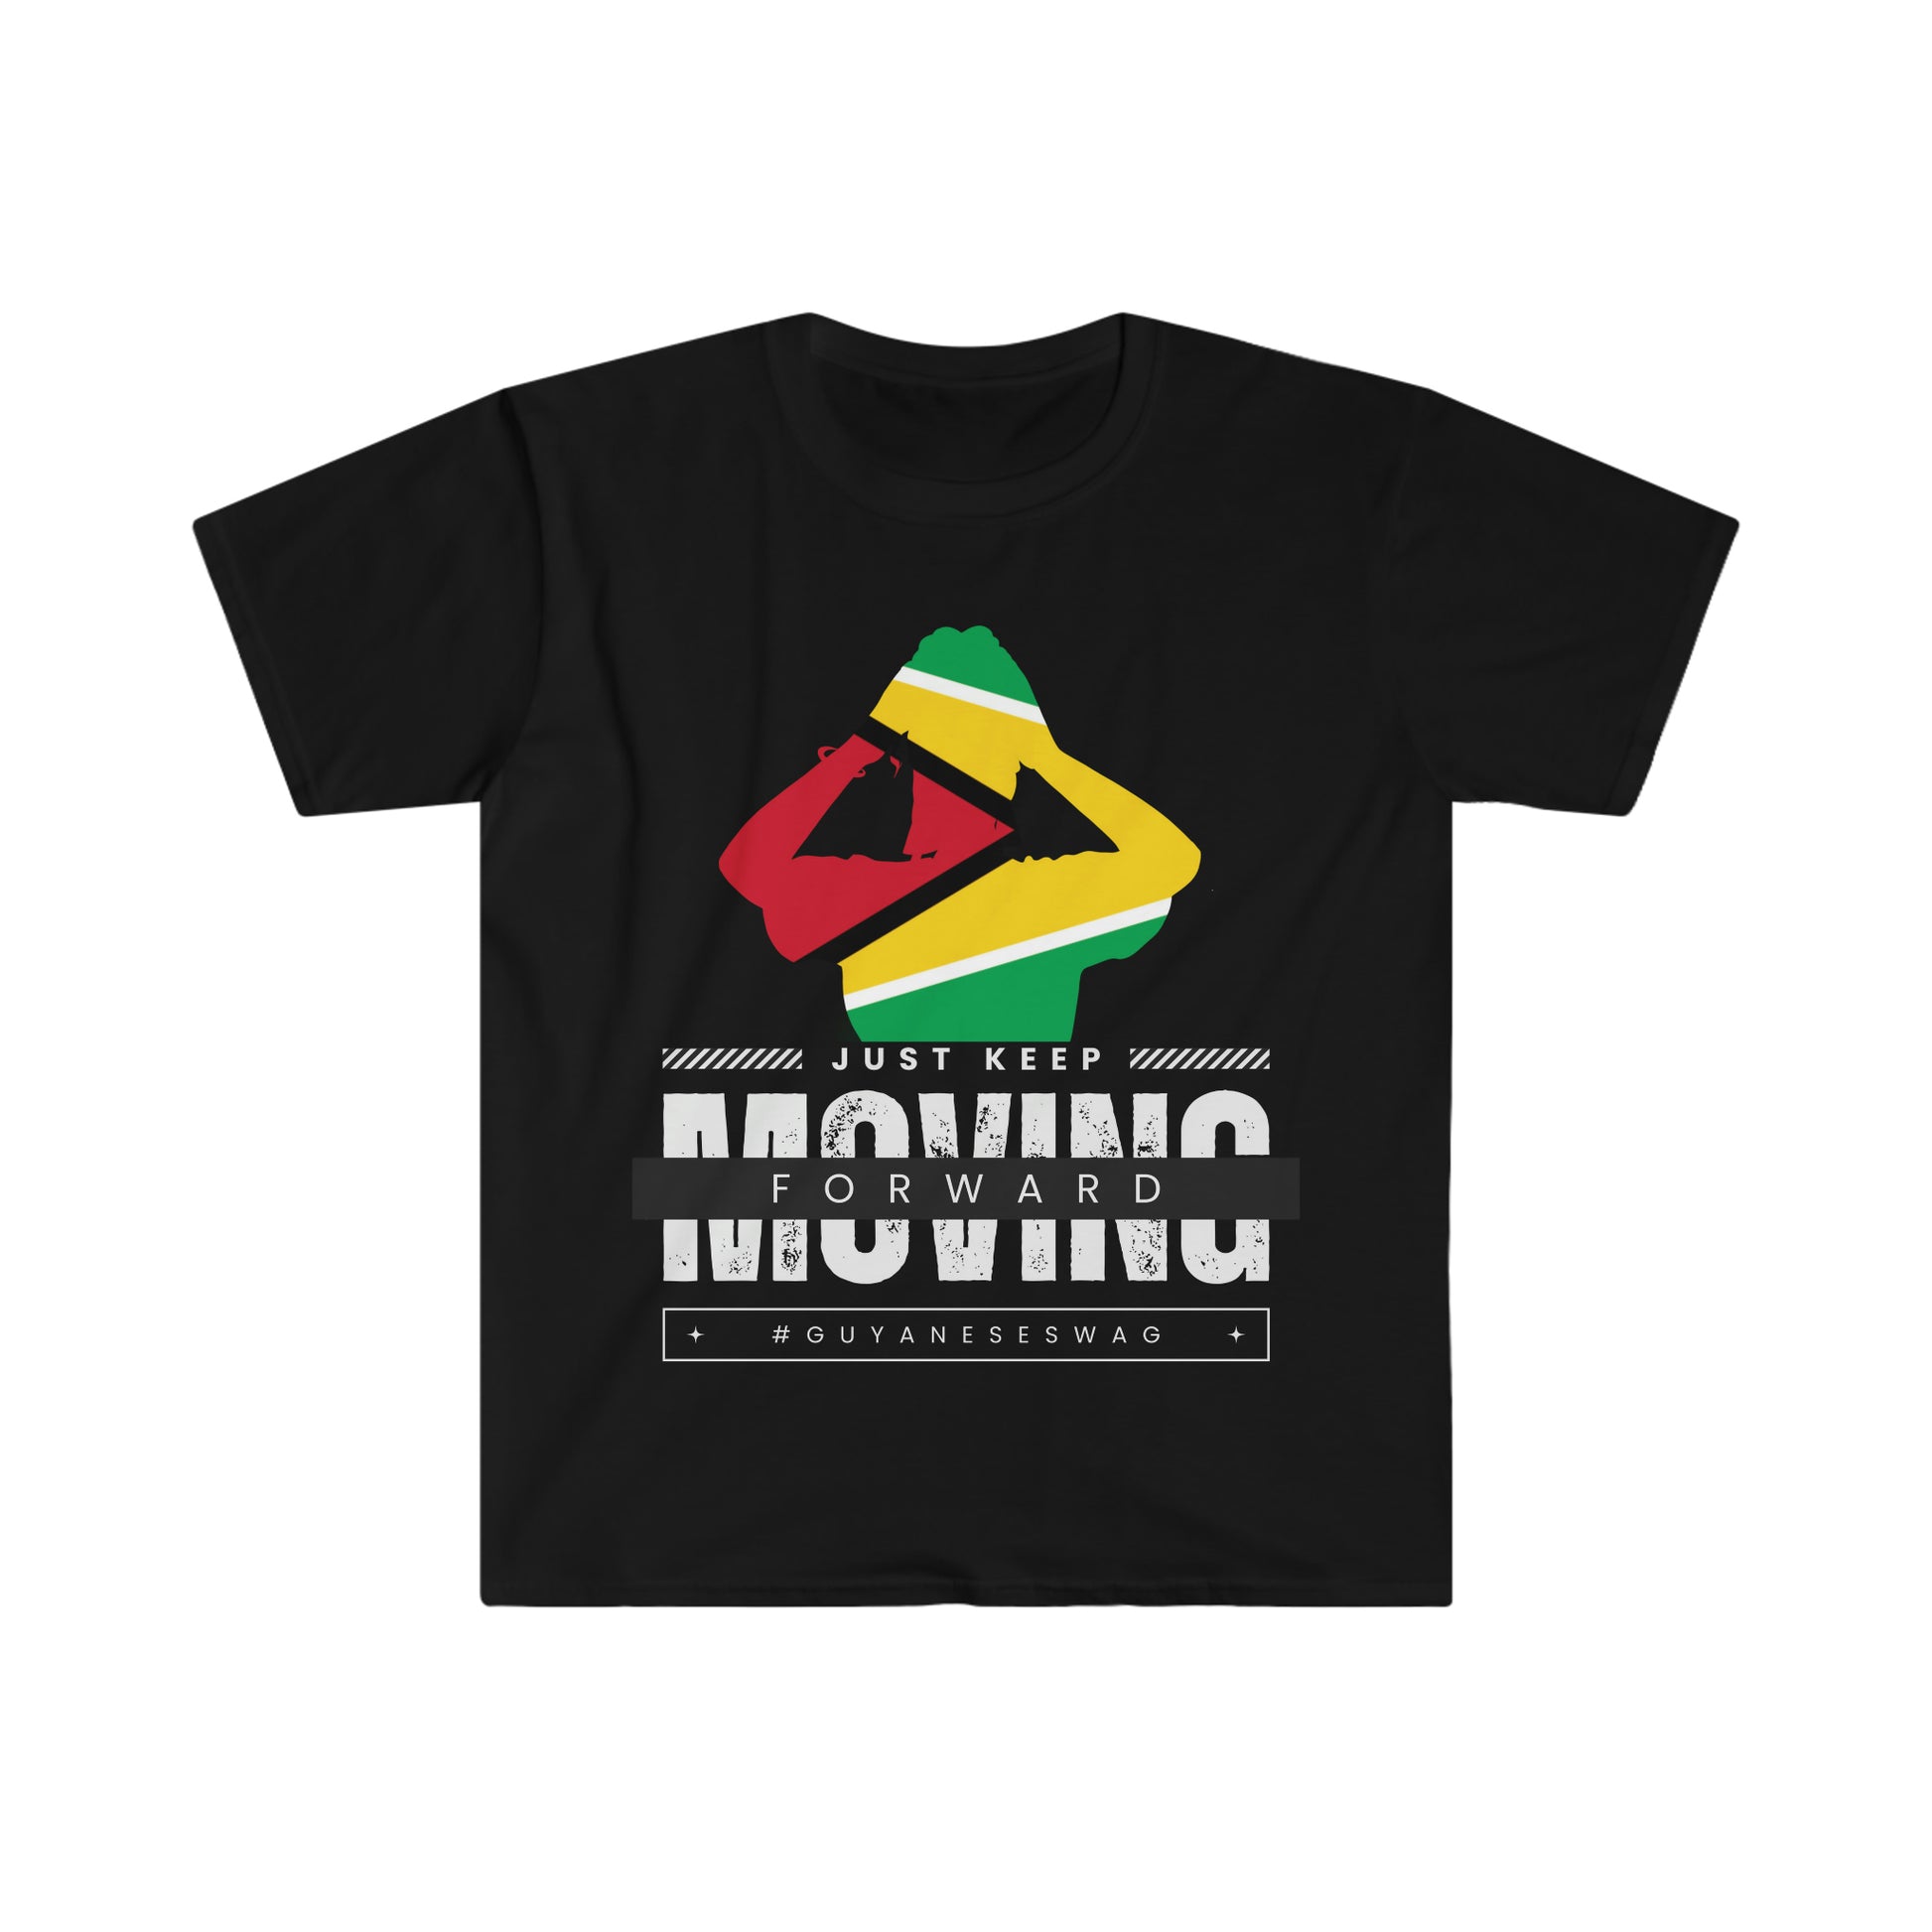 Just Keep Moving Forward Unisex Softstyle T-Shirt by Guyanese Swag